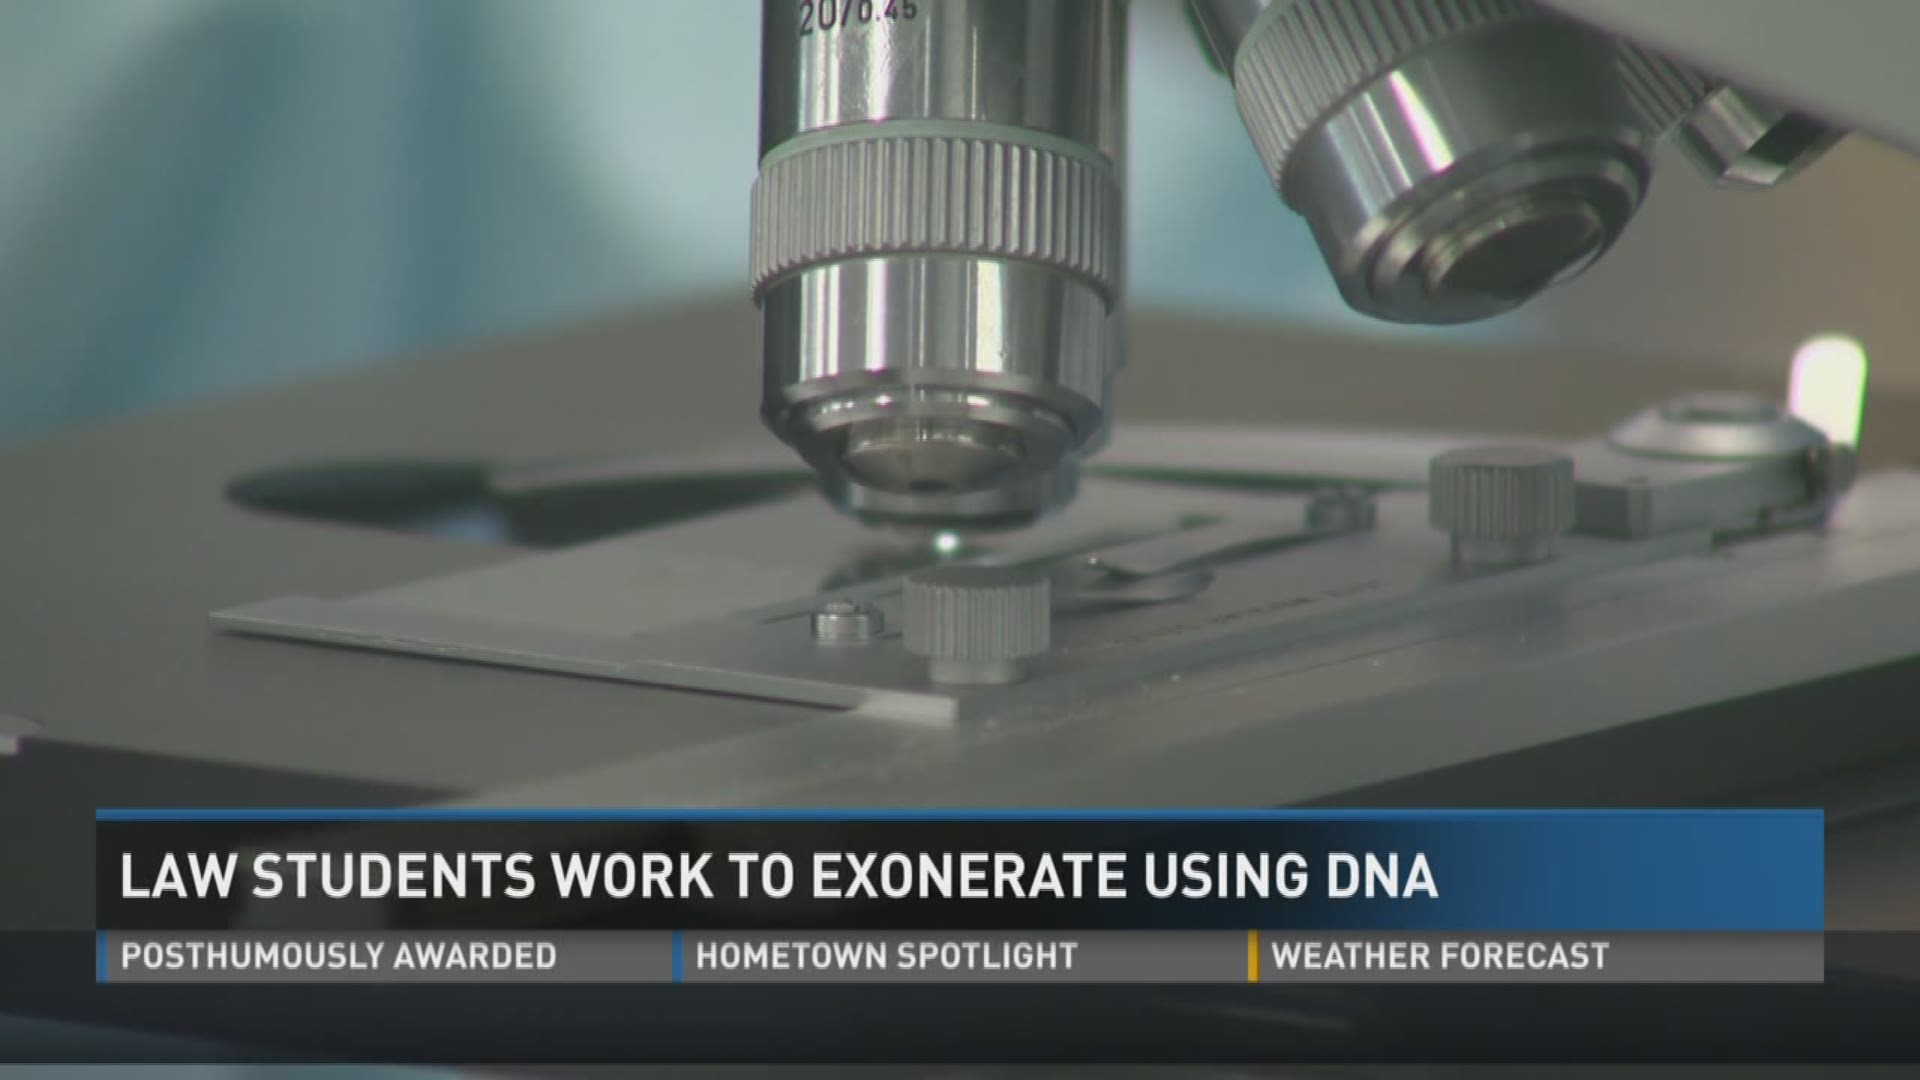 Sept. 28, 2016: Law students at the University of Tennessee are working to exonerate people wrongfully convicted under what's called "junk science" after the FBI found problems with its microscopic hair comparisons before the year 2000.